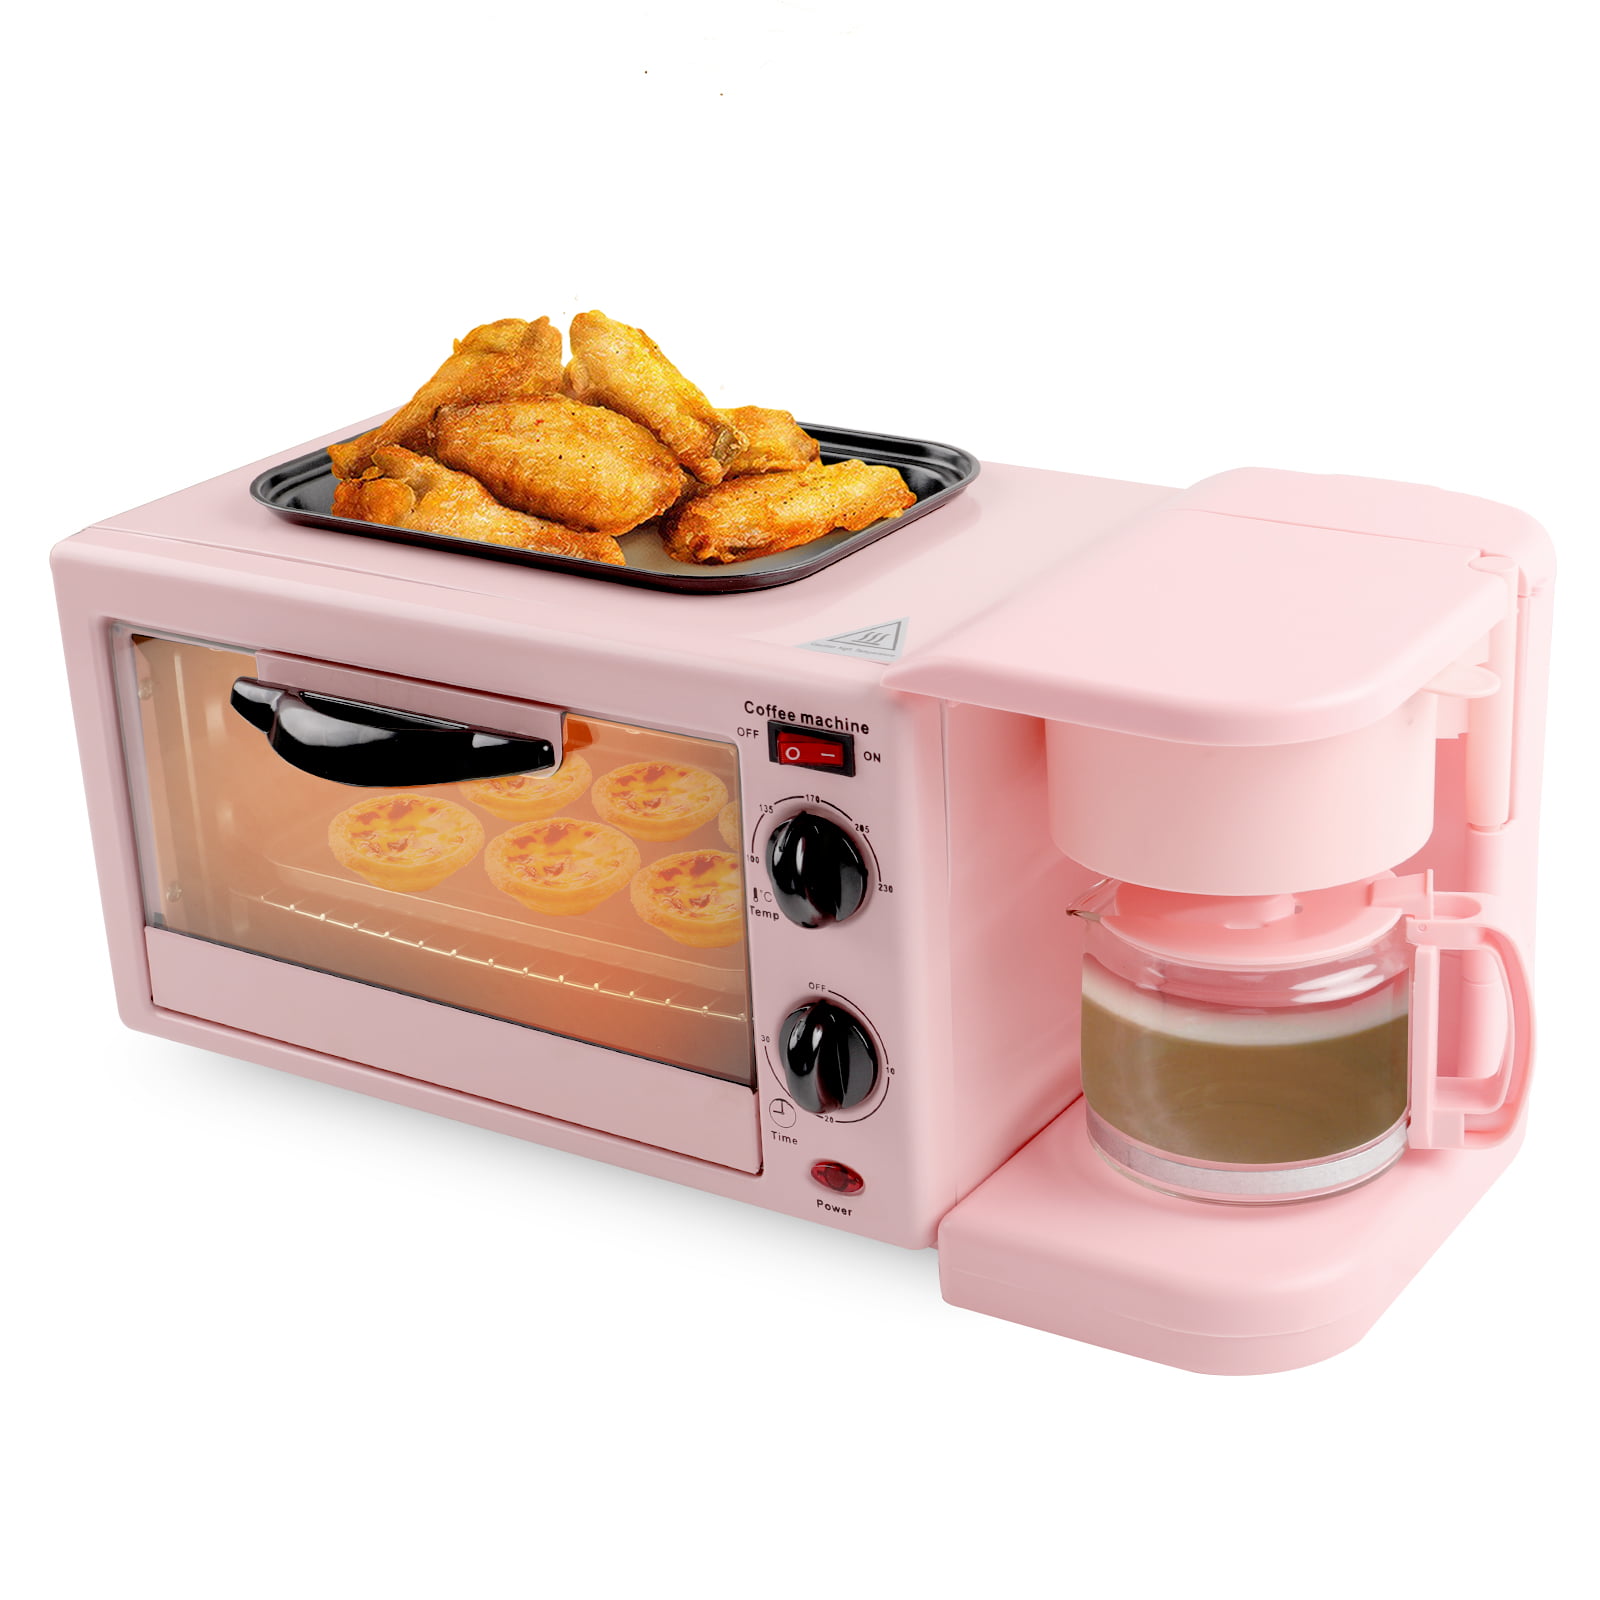 Toaster Oven Non Stick Griddle Bisque Built In Timer Breakfast Station 3-in-1